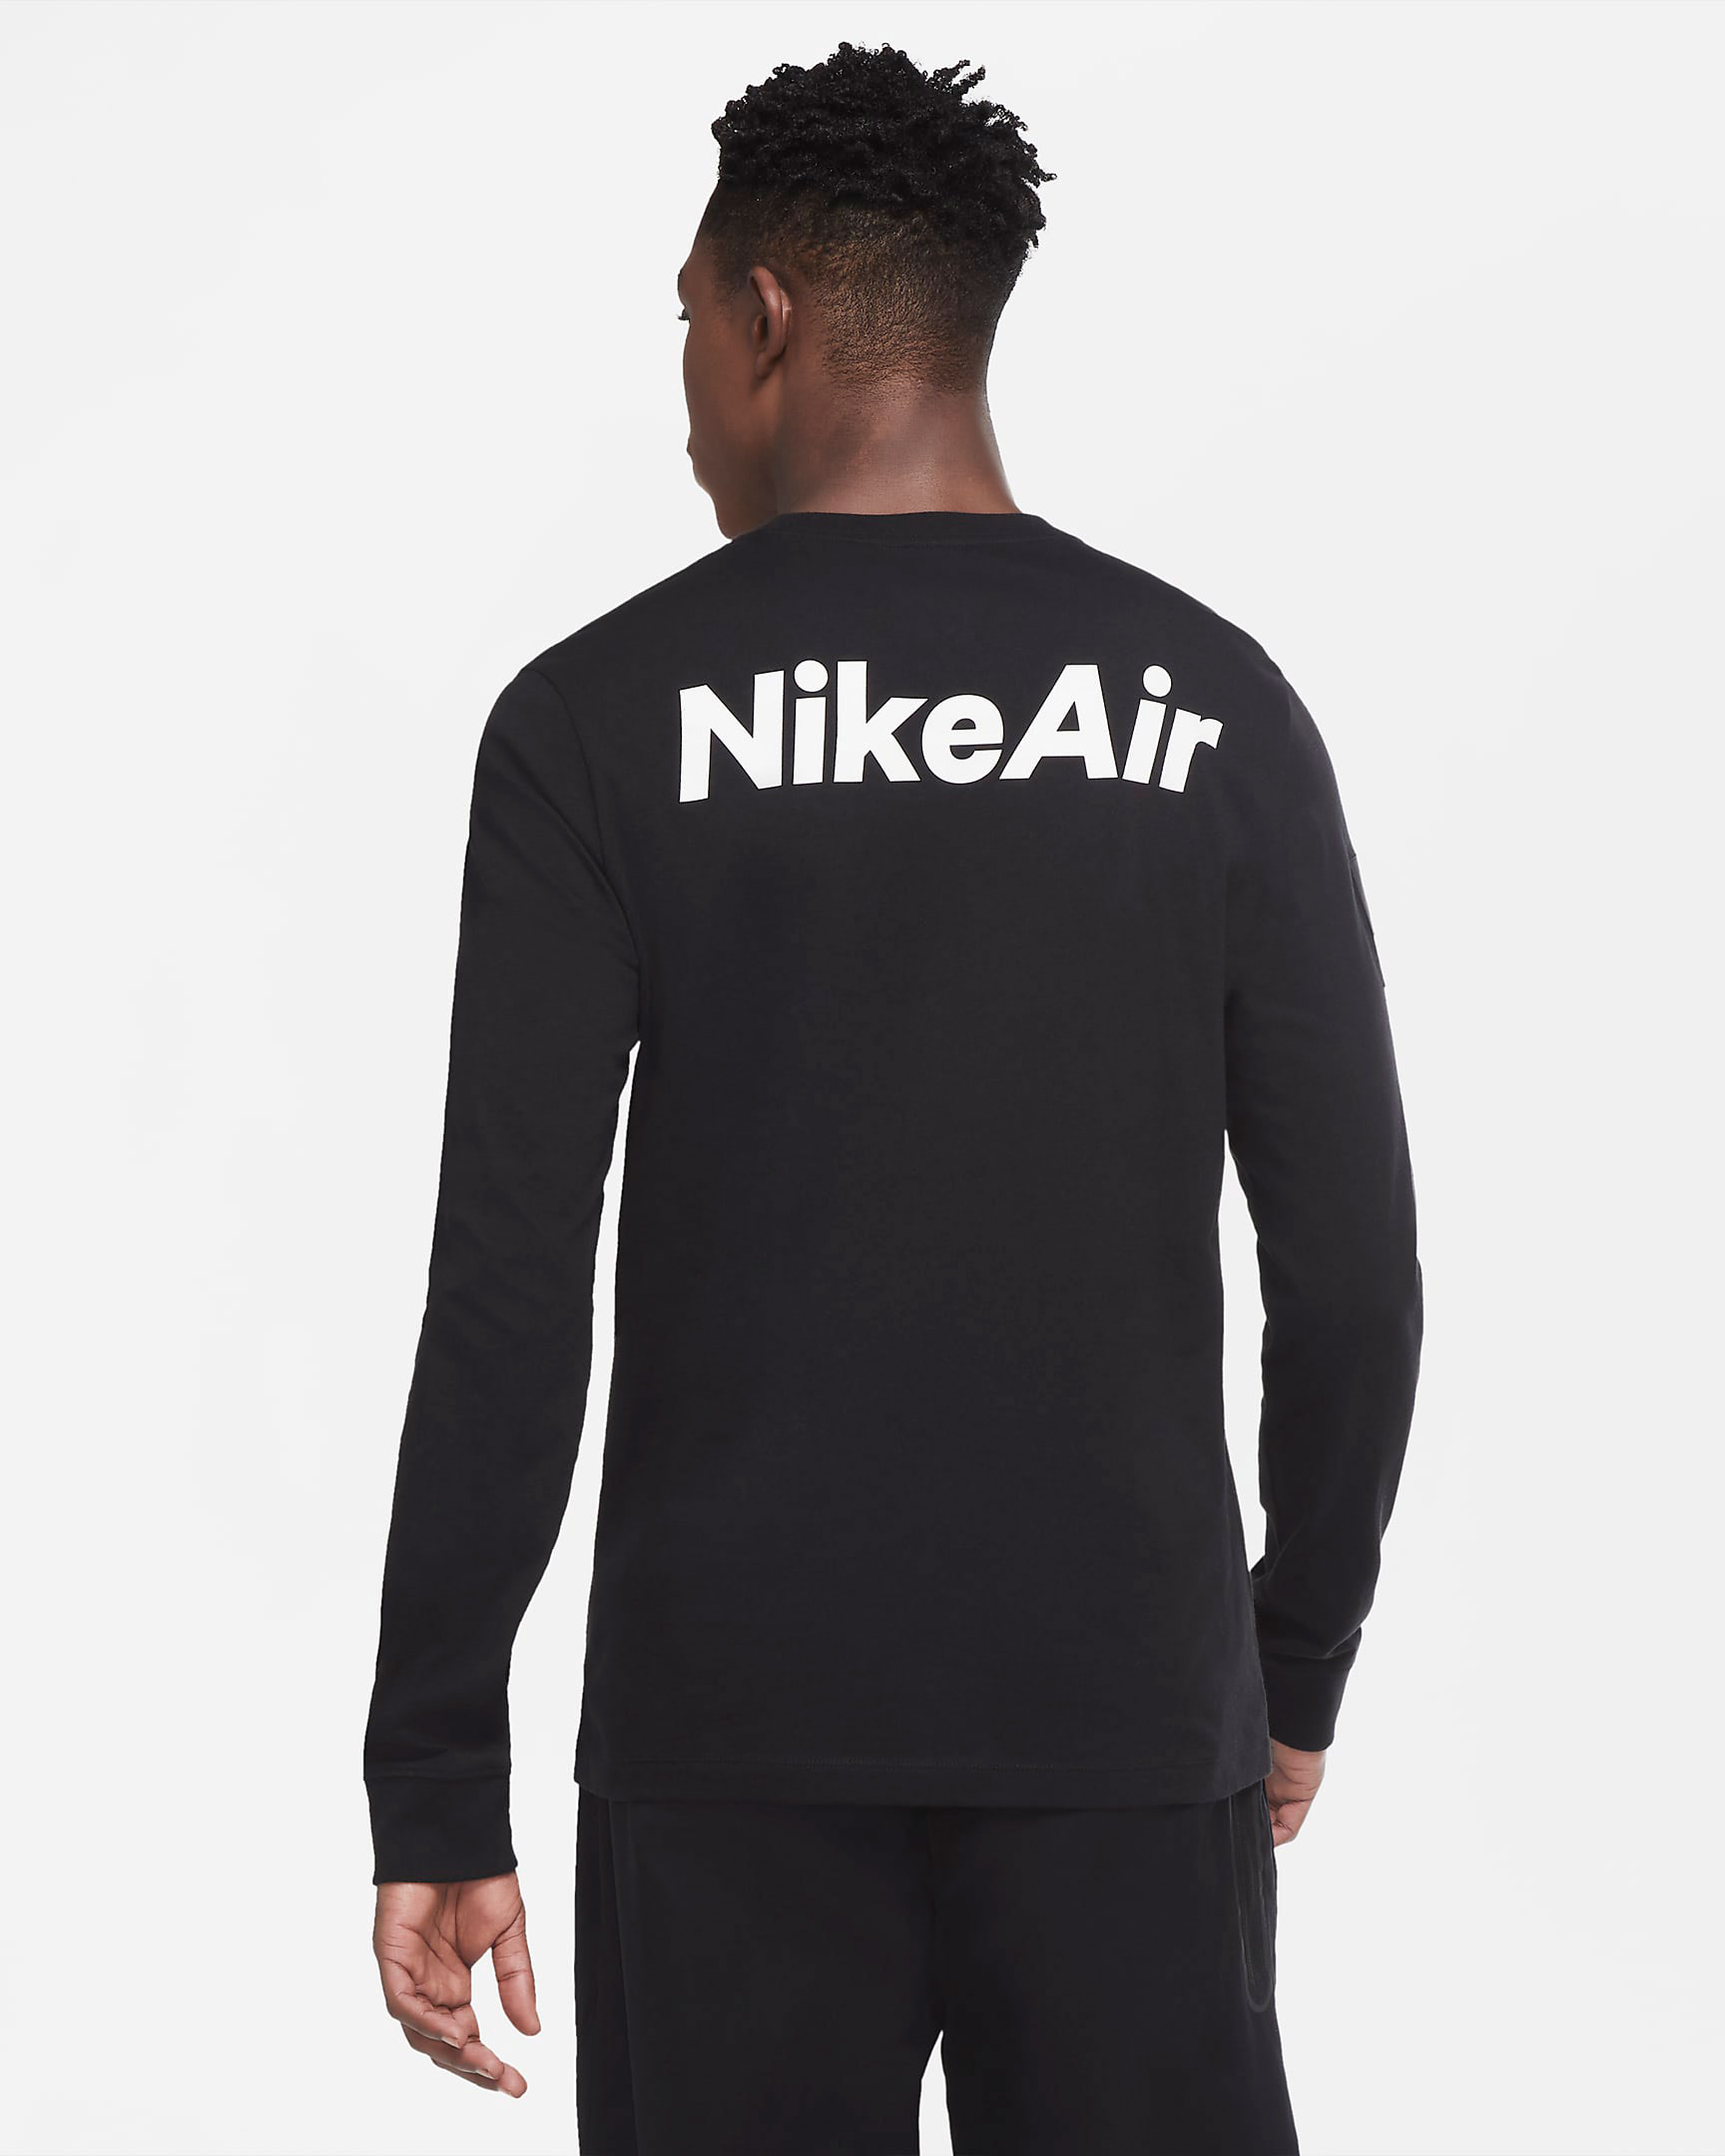 nike-foamposite-one-anthracite-blackout-long-sleeve-shirt-match-2